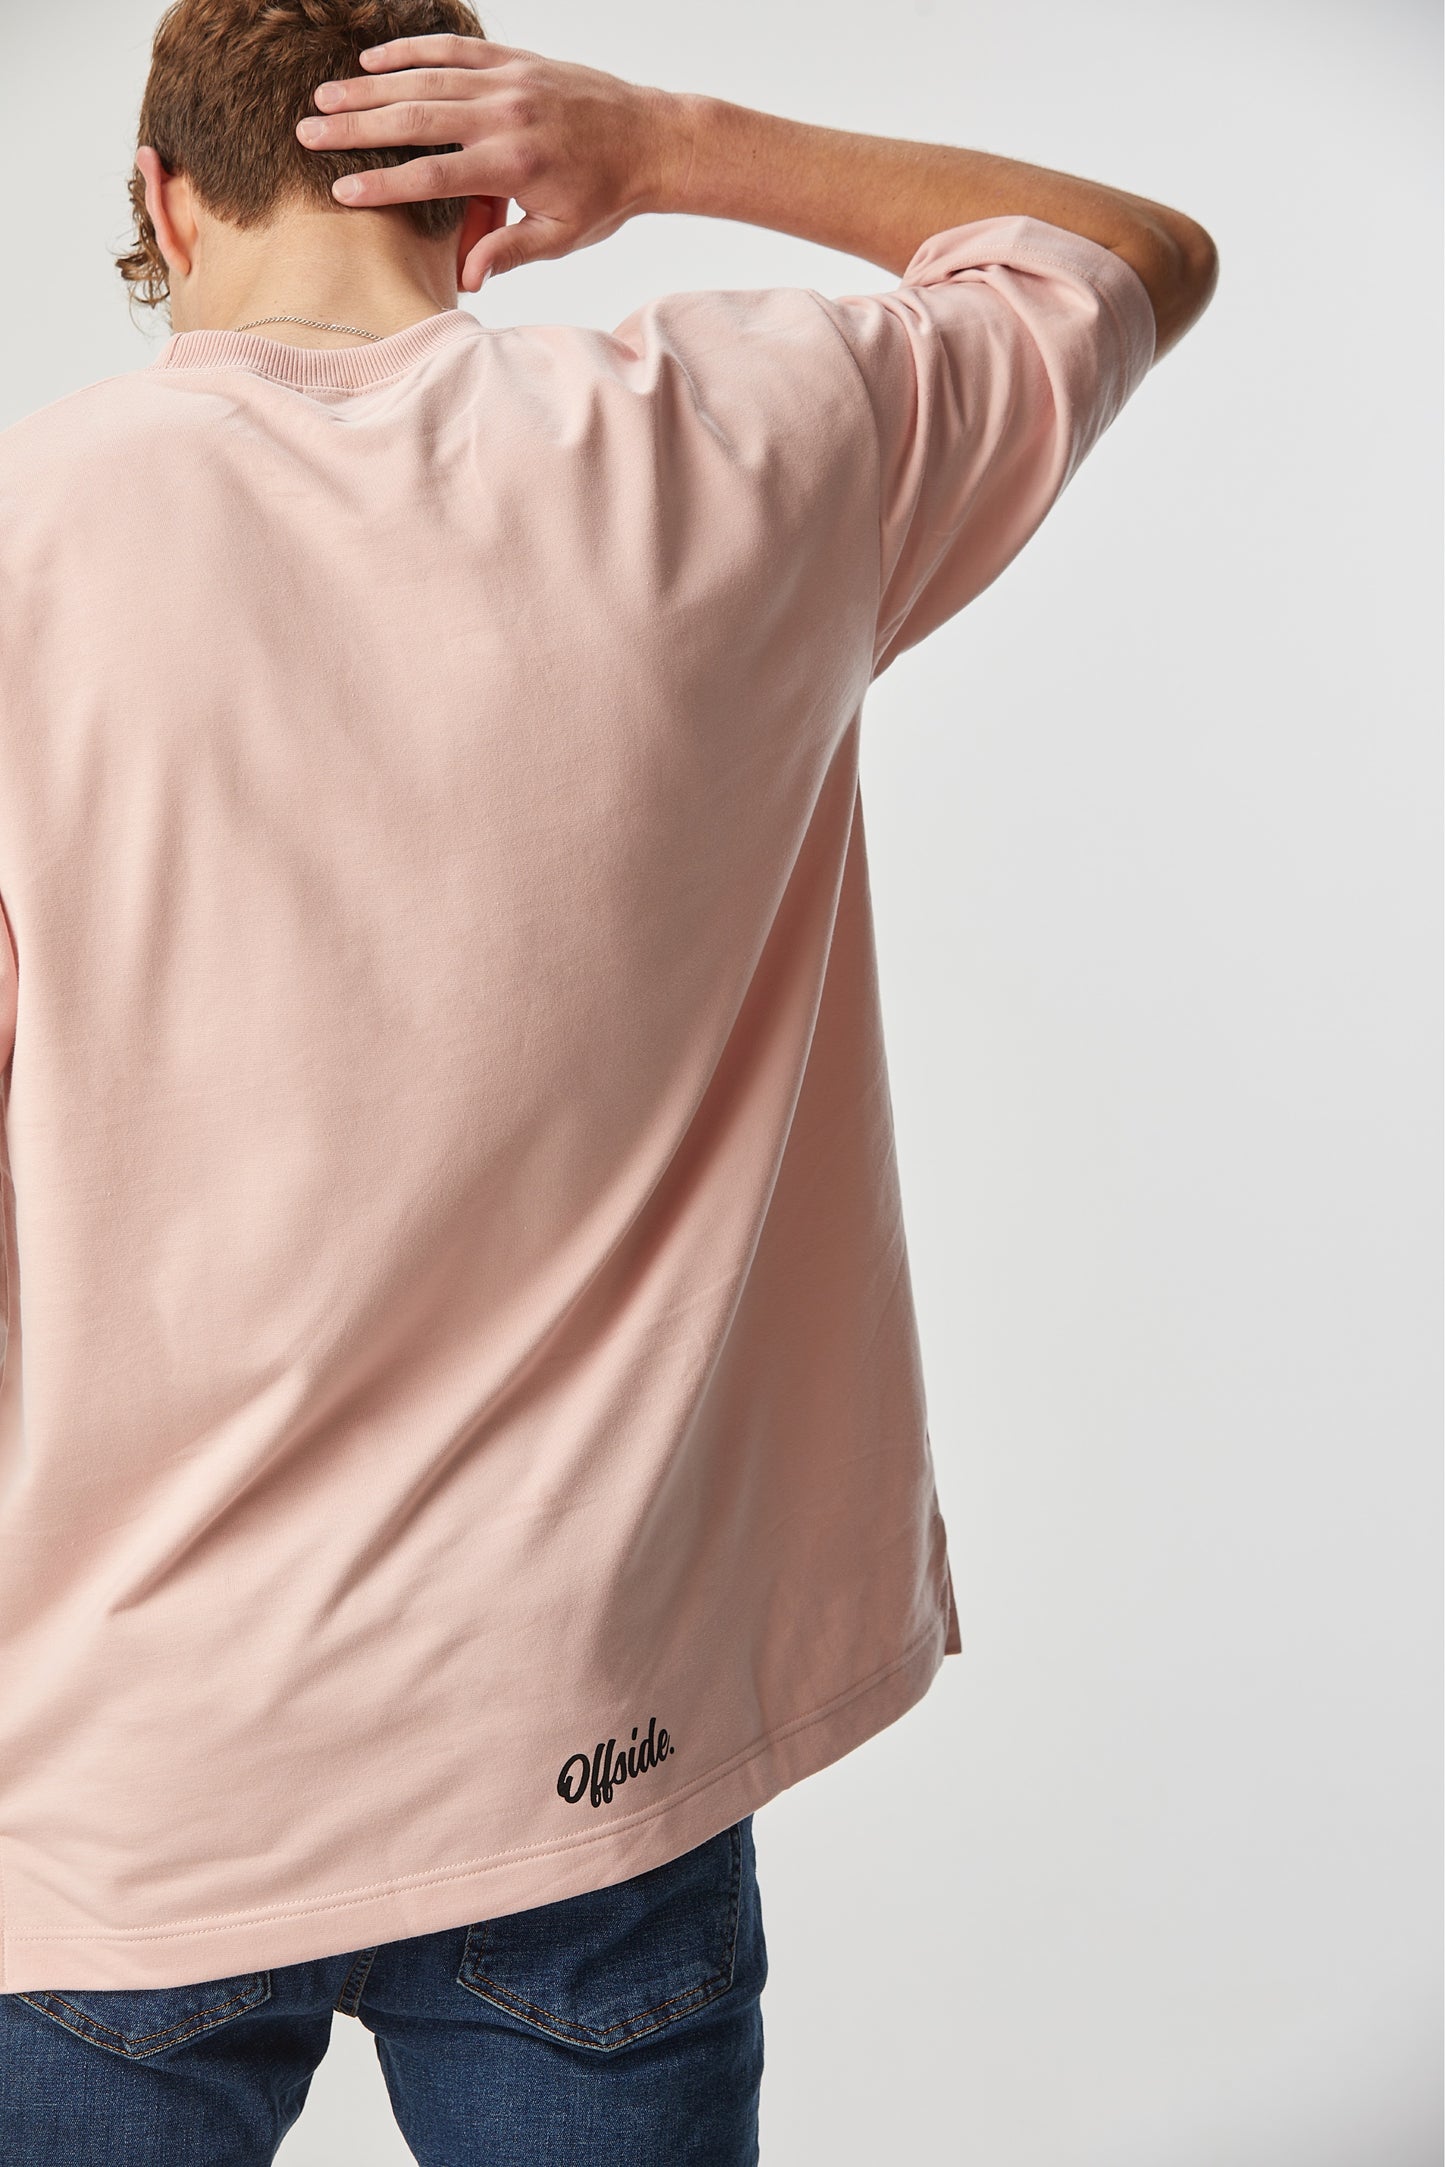 Offside Signature Oversize T. (Pink)